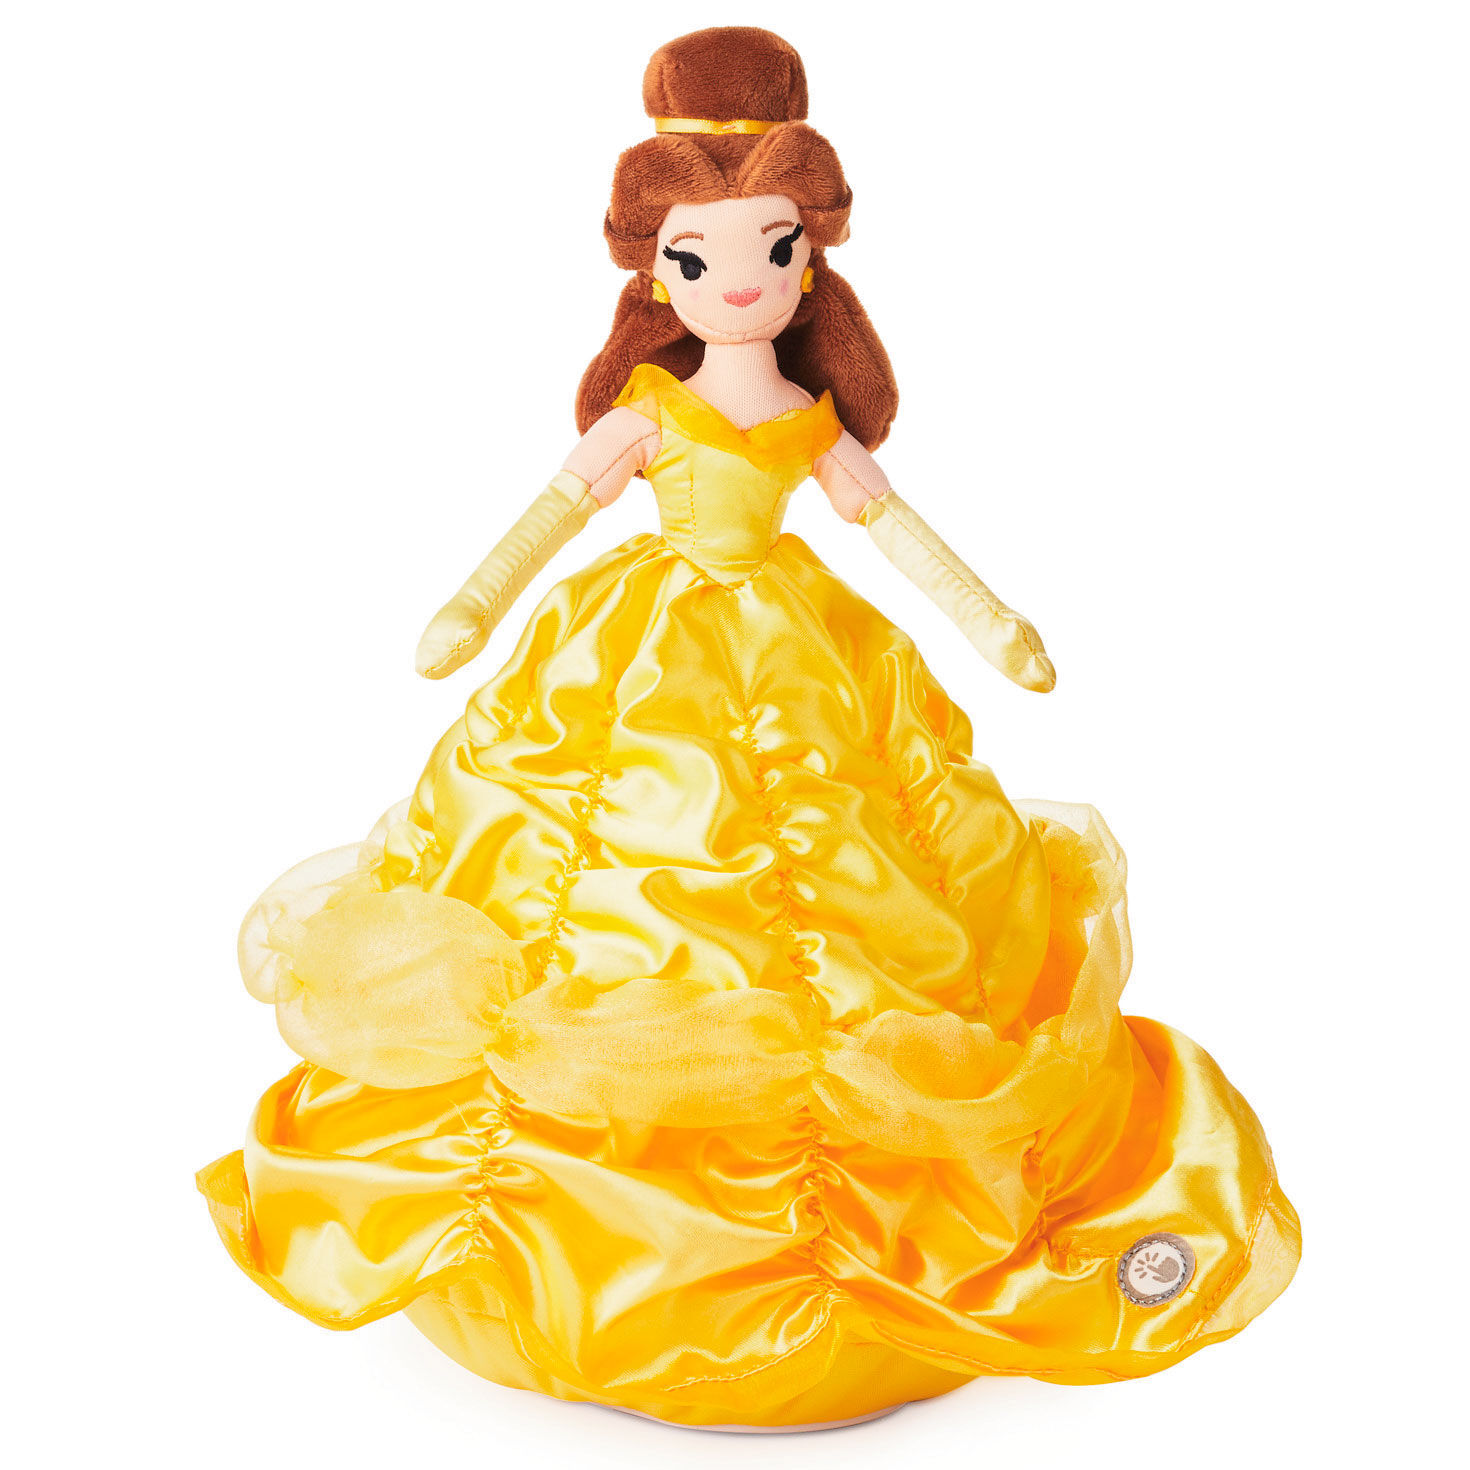 NEW! DISNEY PRINCESS Beauty and the Beast BELLE 8" plush soft toy movie 